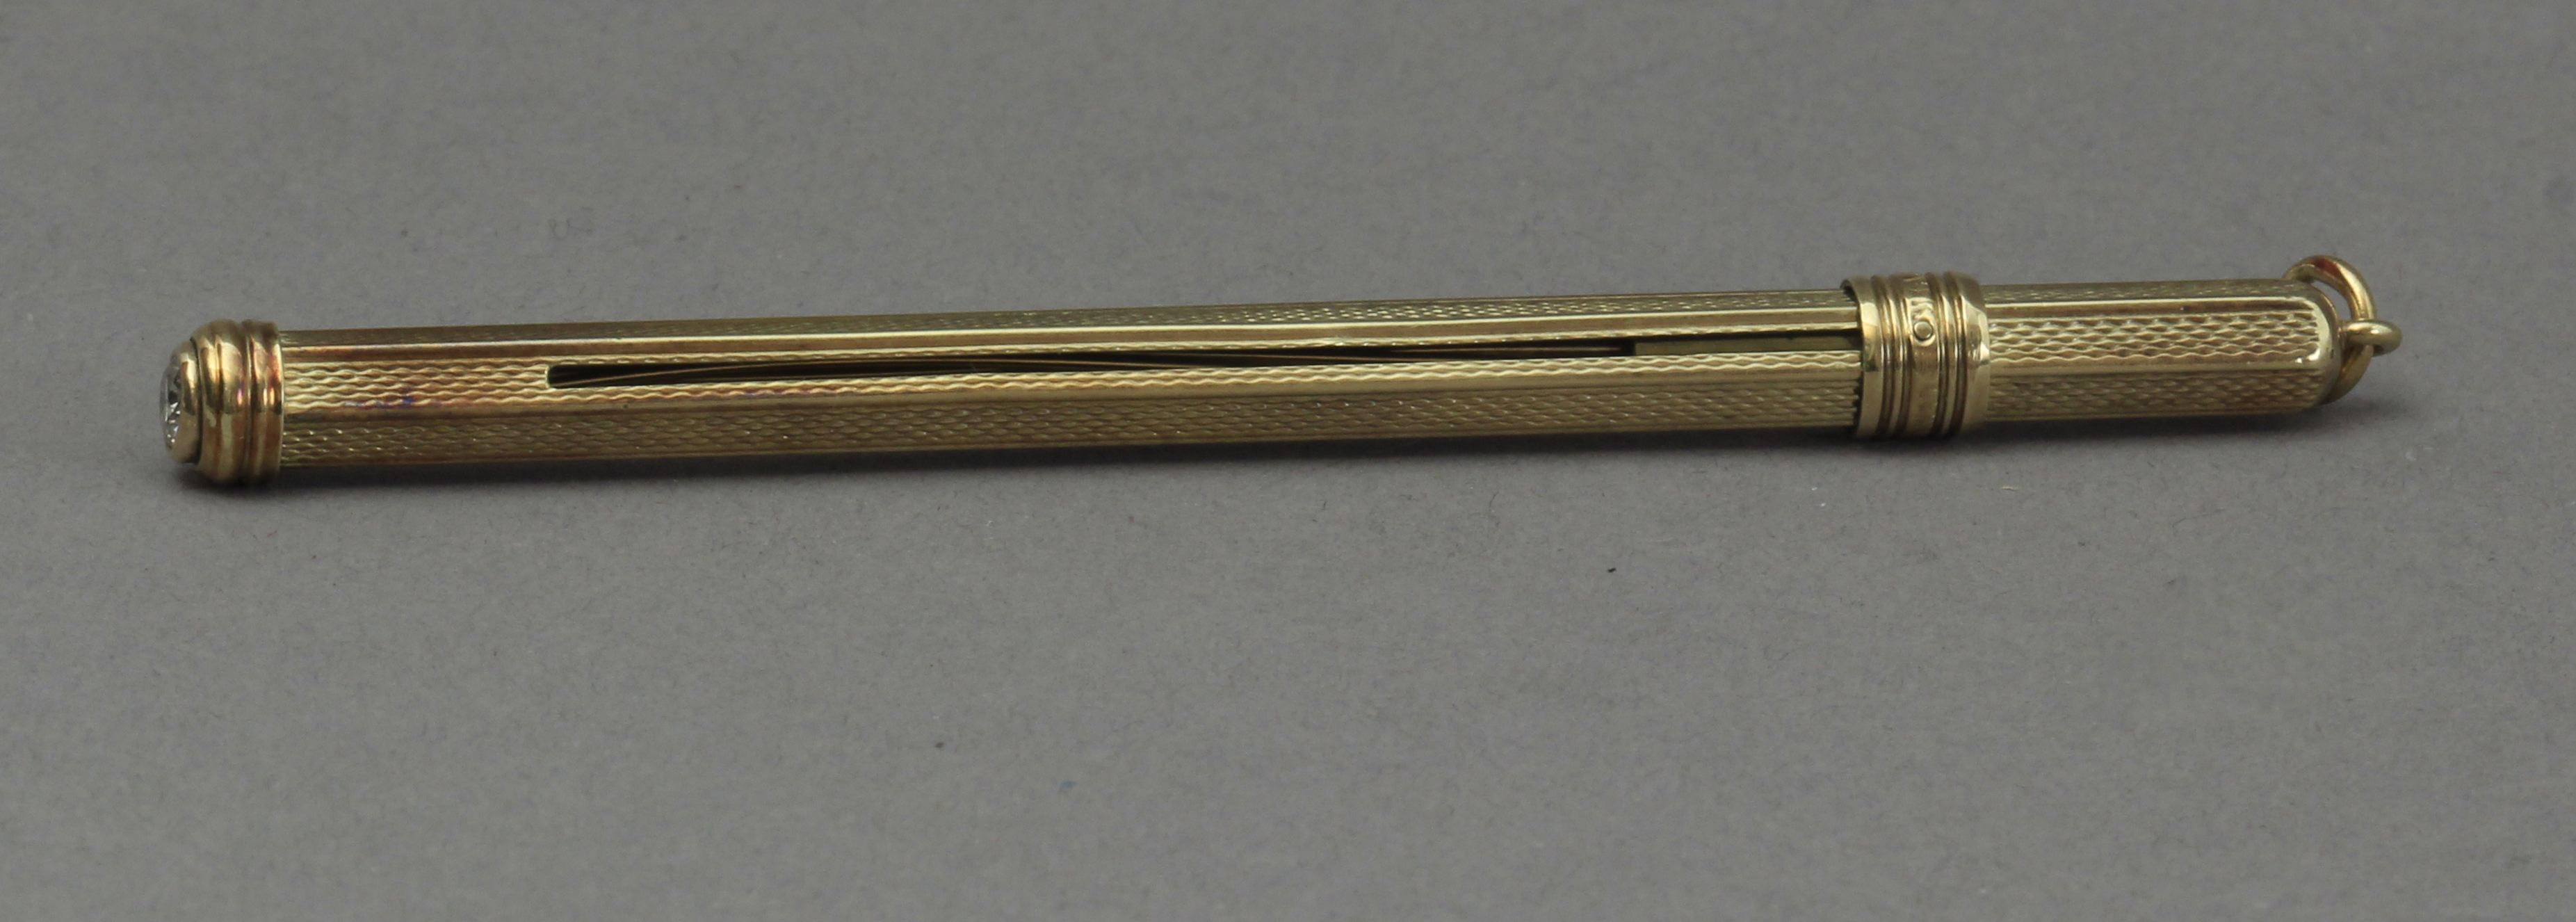 A mid 20th century 14k. gold and diamond cocktail mixer tool - Image 2 of 2